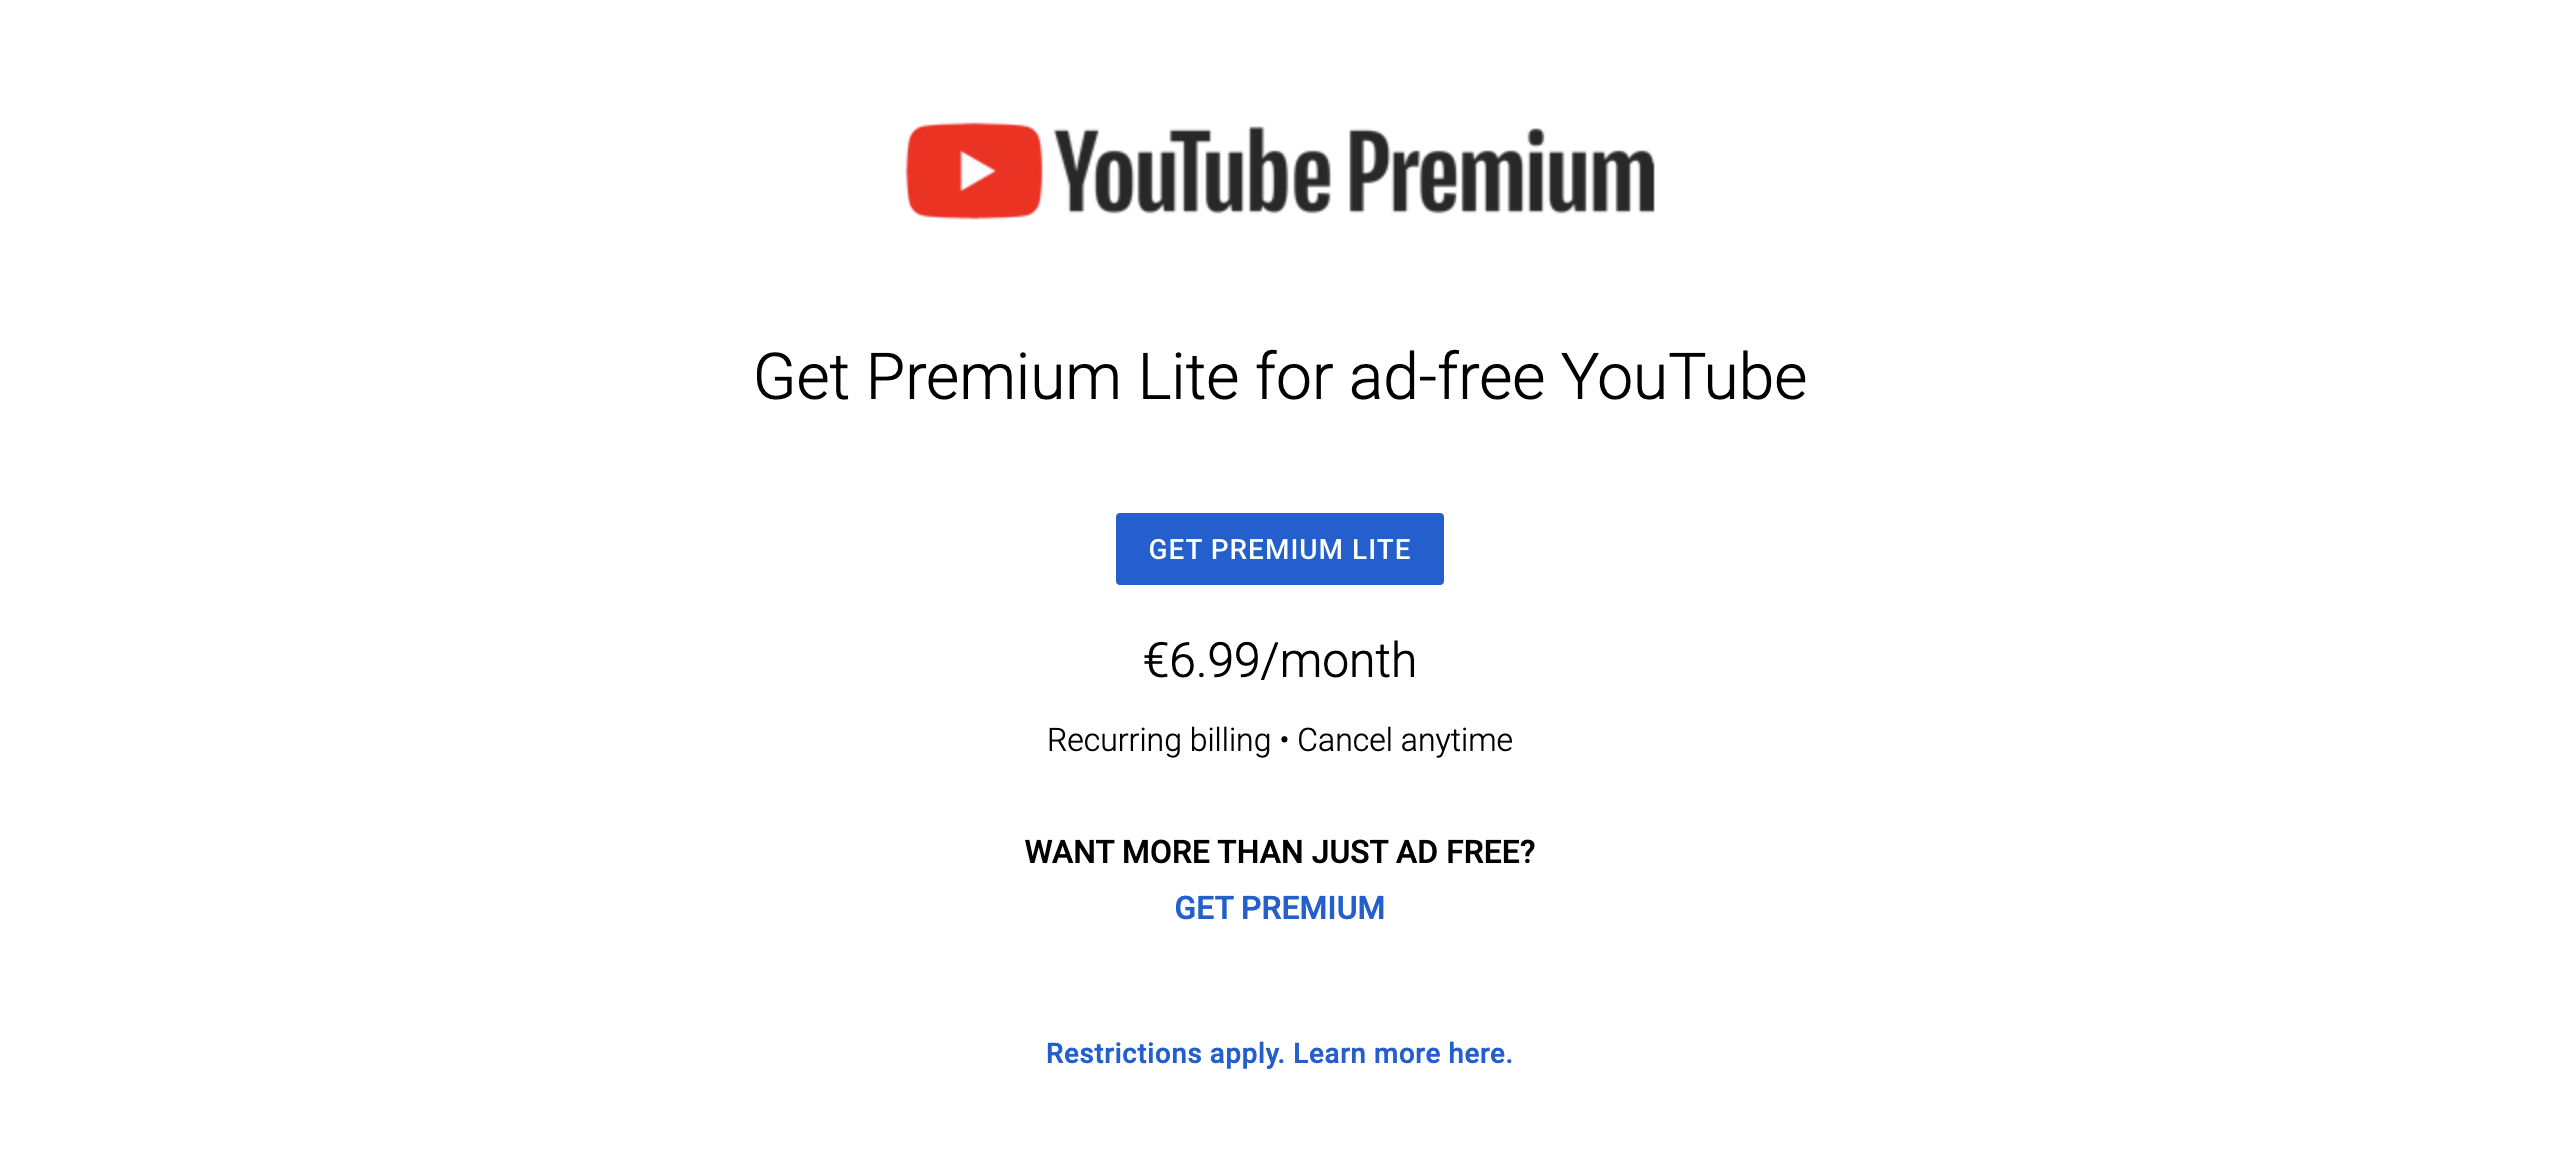 YouTube are testing Premium Lite subscriptions – ad-free YouTube at a reduced price